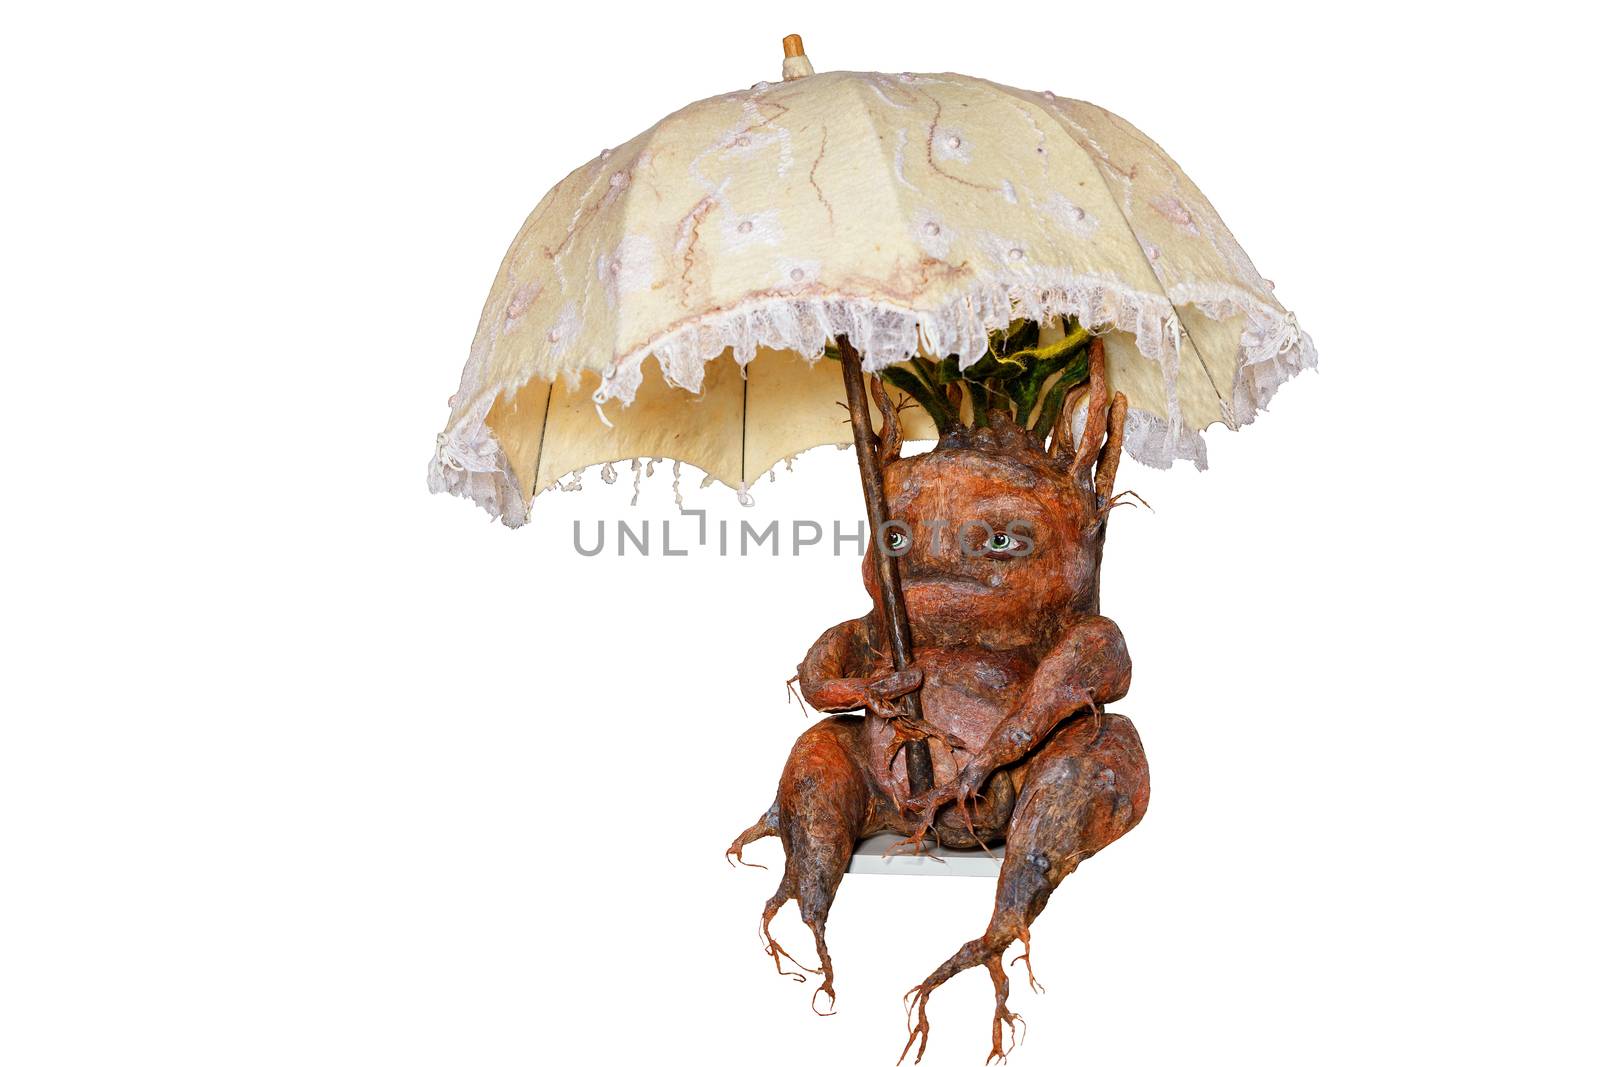 Figurine of mandrake root, which sits on a bench under an old umbrella, scary, funny, carved from a wood, isolated on white.